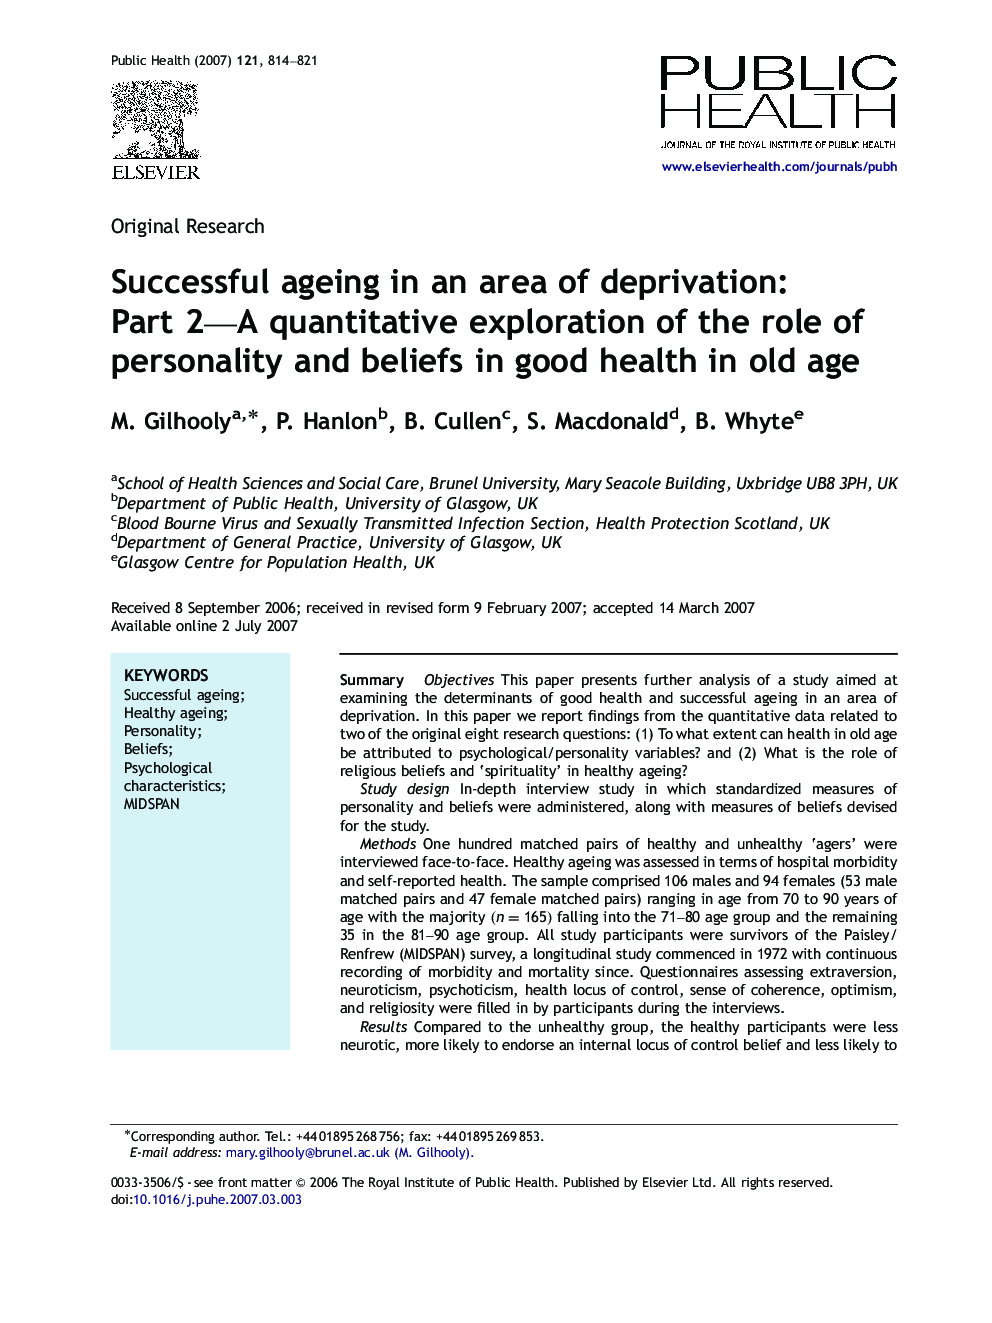 Successful ageing in an area of deprivation: Part 2—A quantitative exploration of the role of personality and beliefs in good health in old age